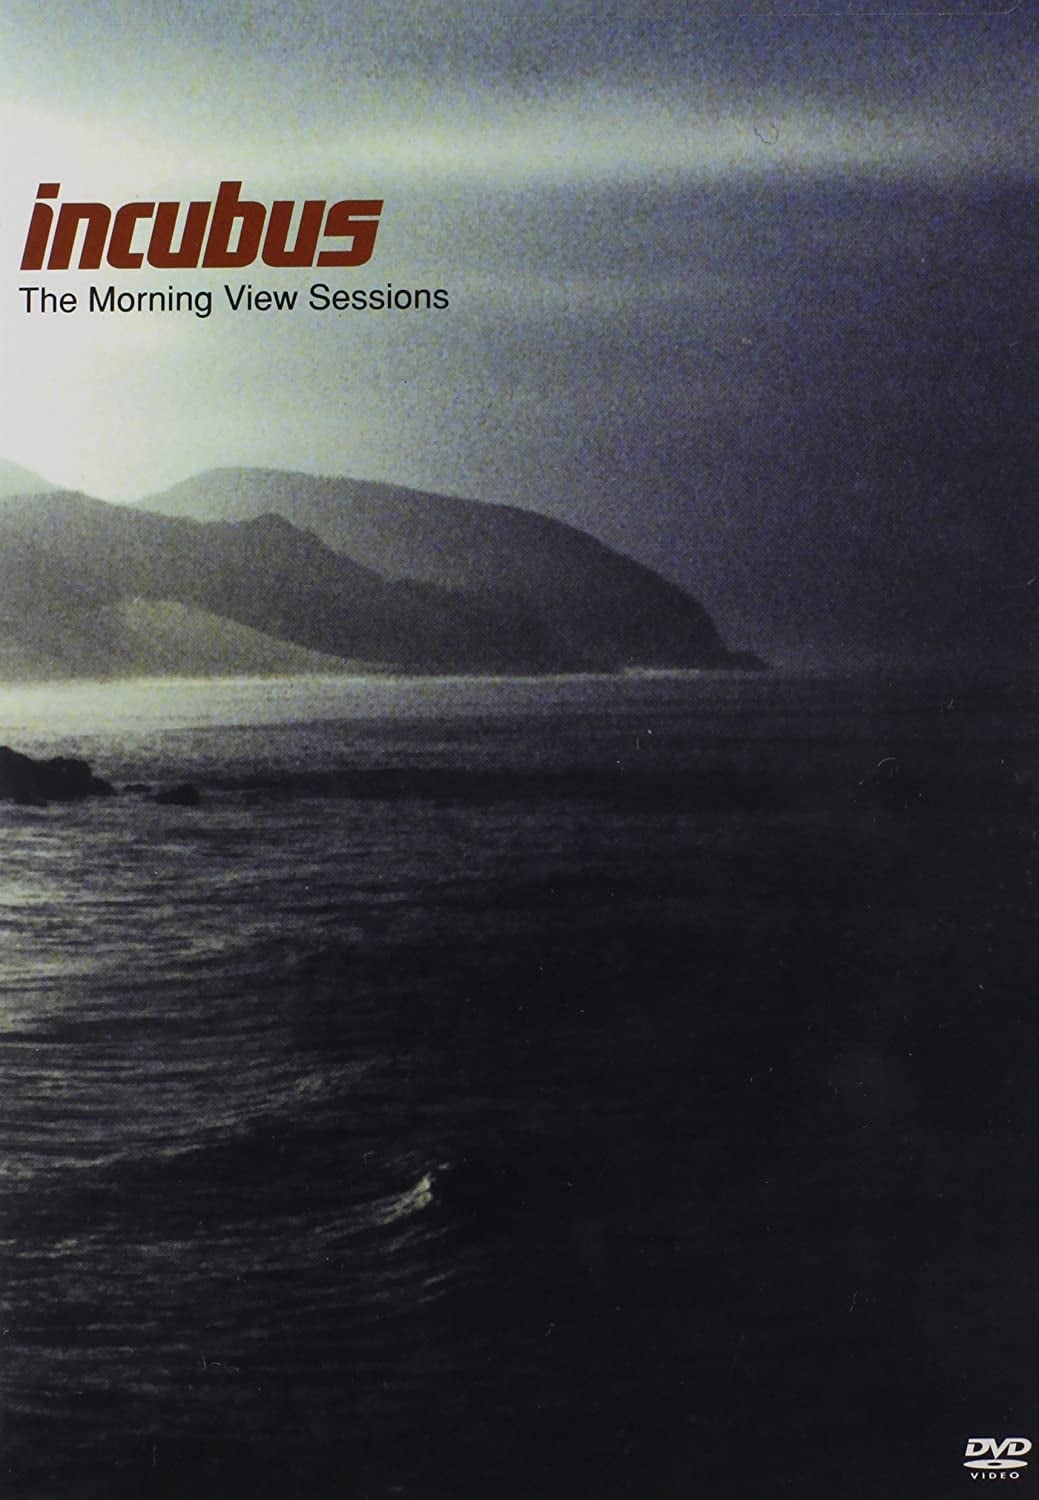 The Morning View Sessions / Incubus